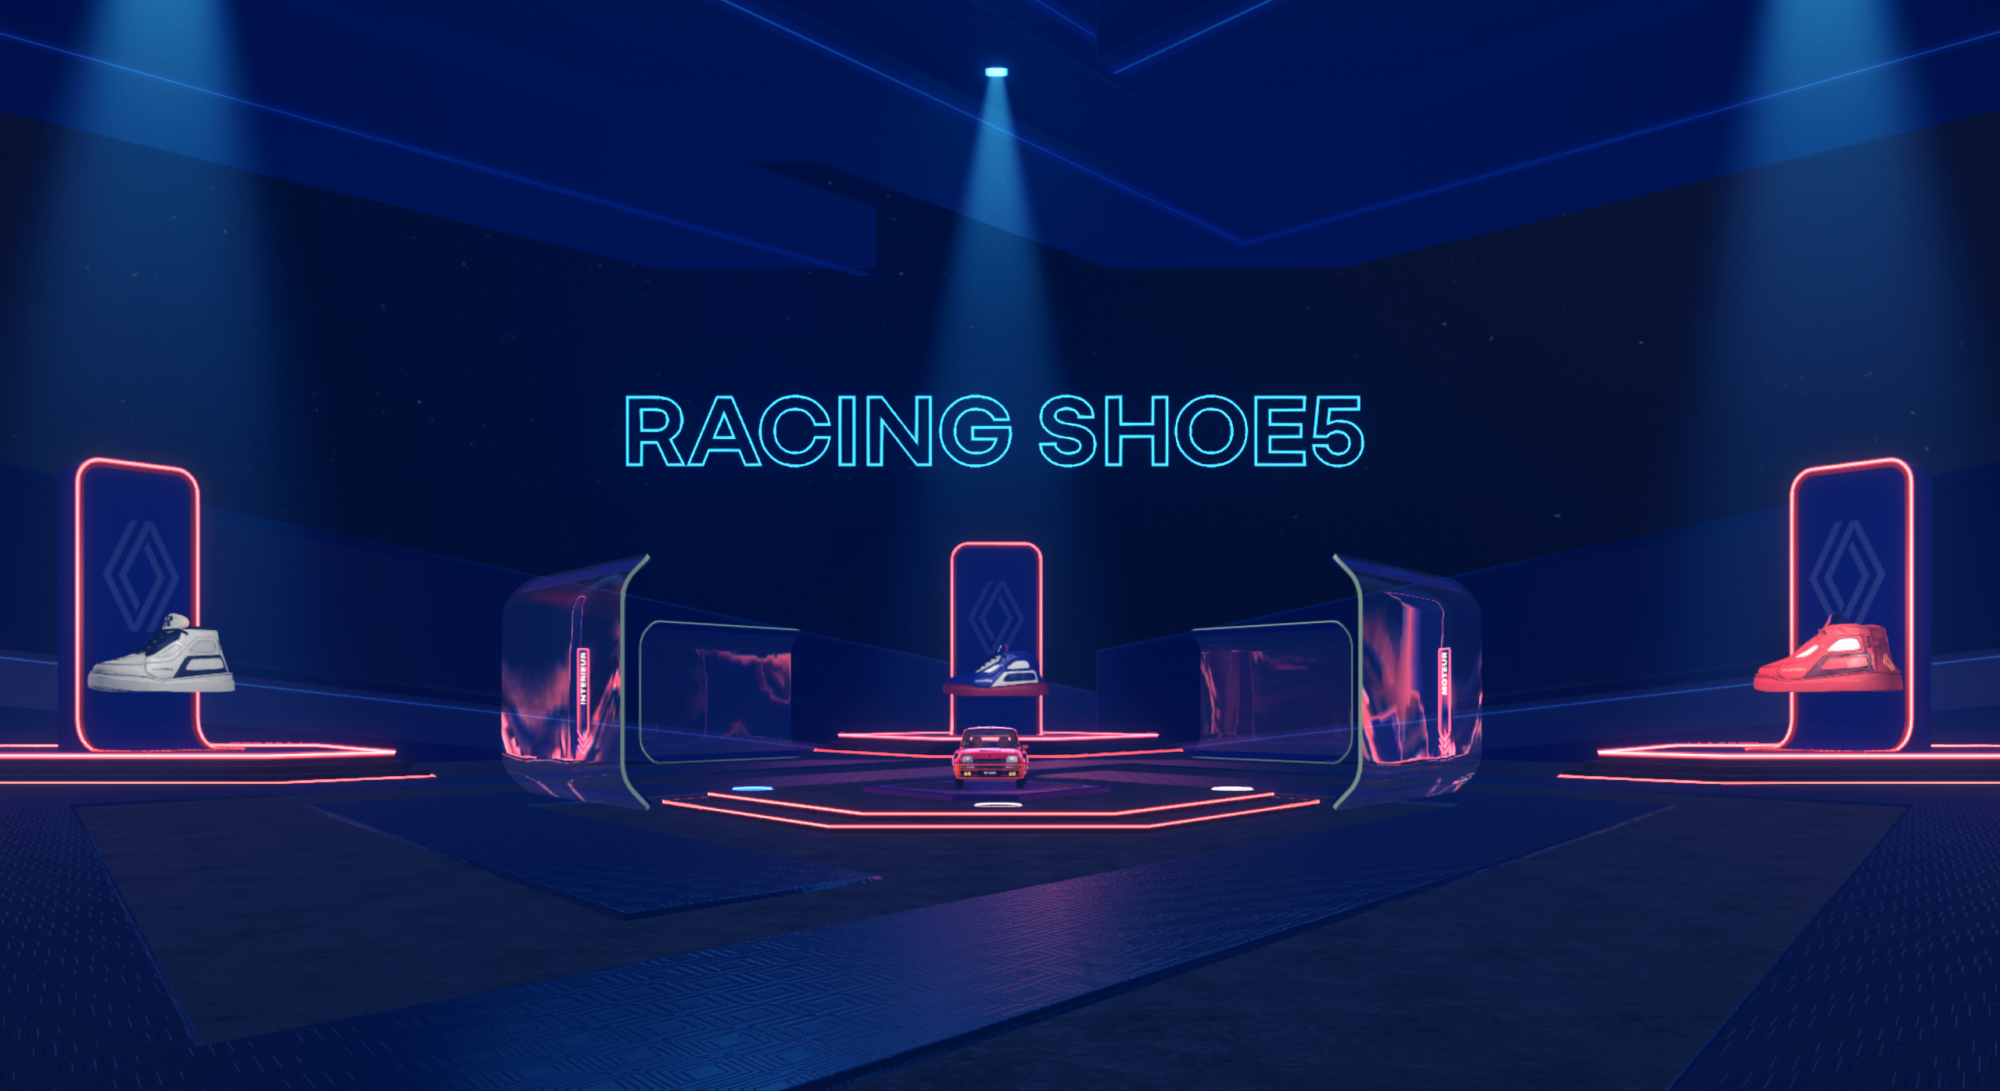 RACING SHOE5: collector’s edition sneakers, inspired by the R5 Turbo and sold on Renault’s first virtual shop